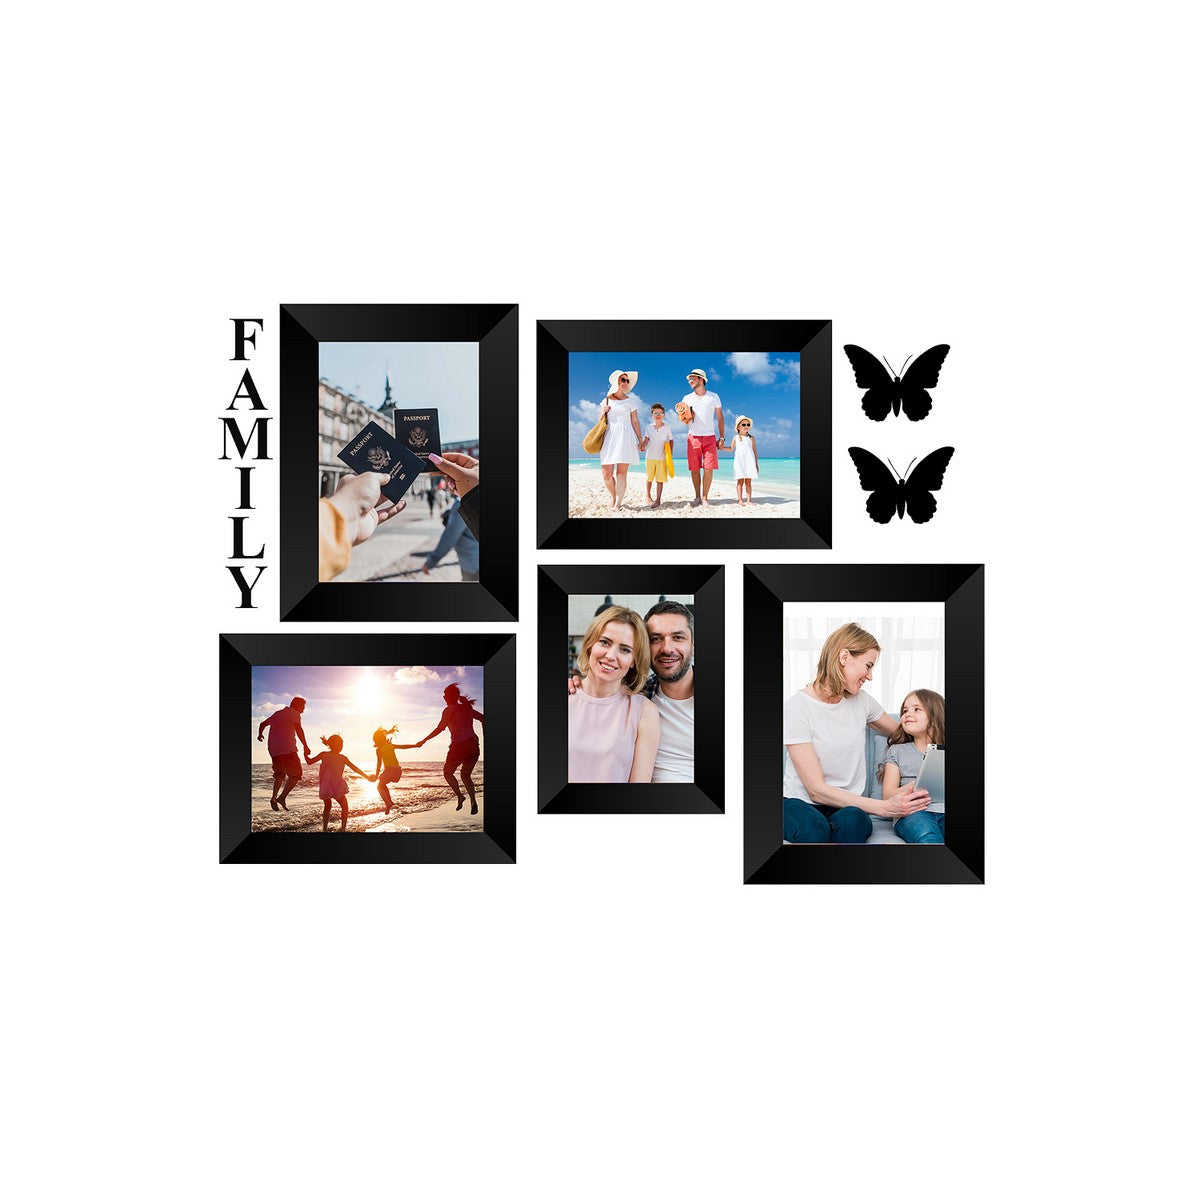 Memory Wall Collage Photo Frame - Set of 5 Photo Frames for 1 Photos of 4"x6", 4 Photos of 5"x7", 1 Piece of FAMILY, 2 Pieces of BUTTERFLIES